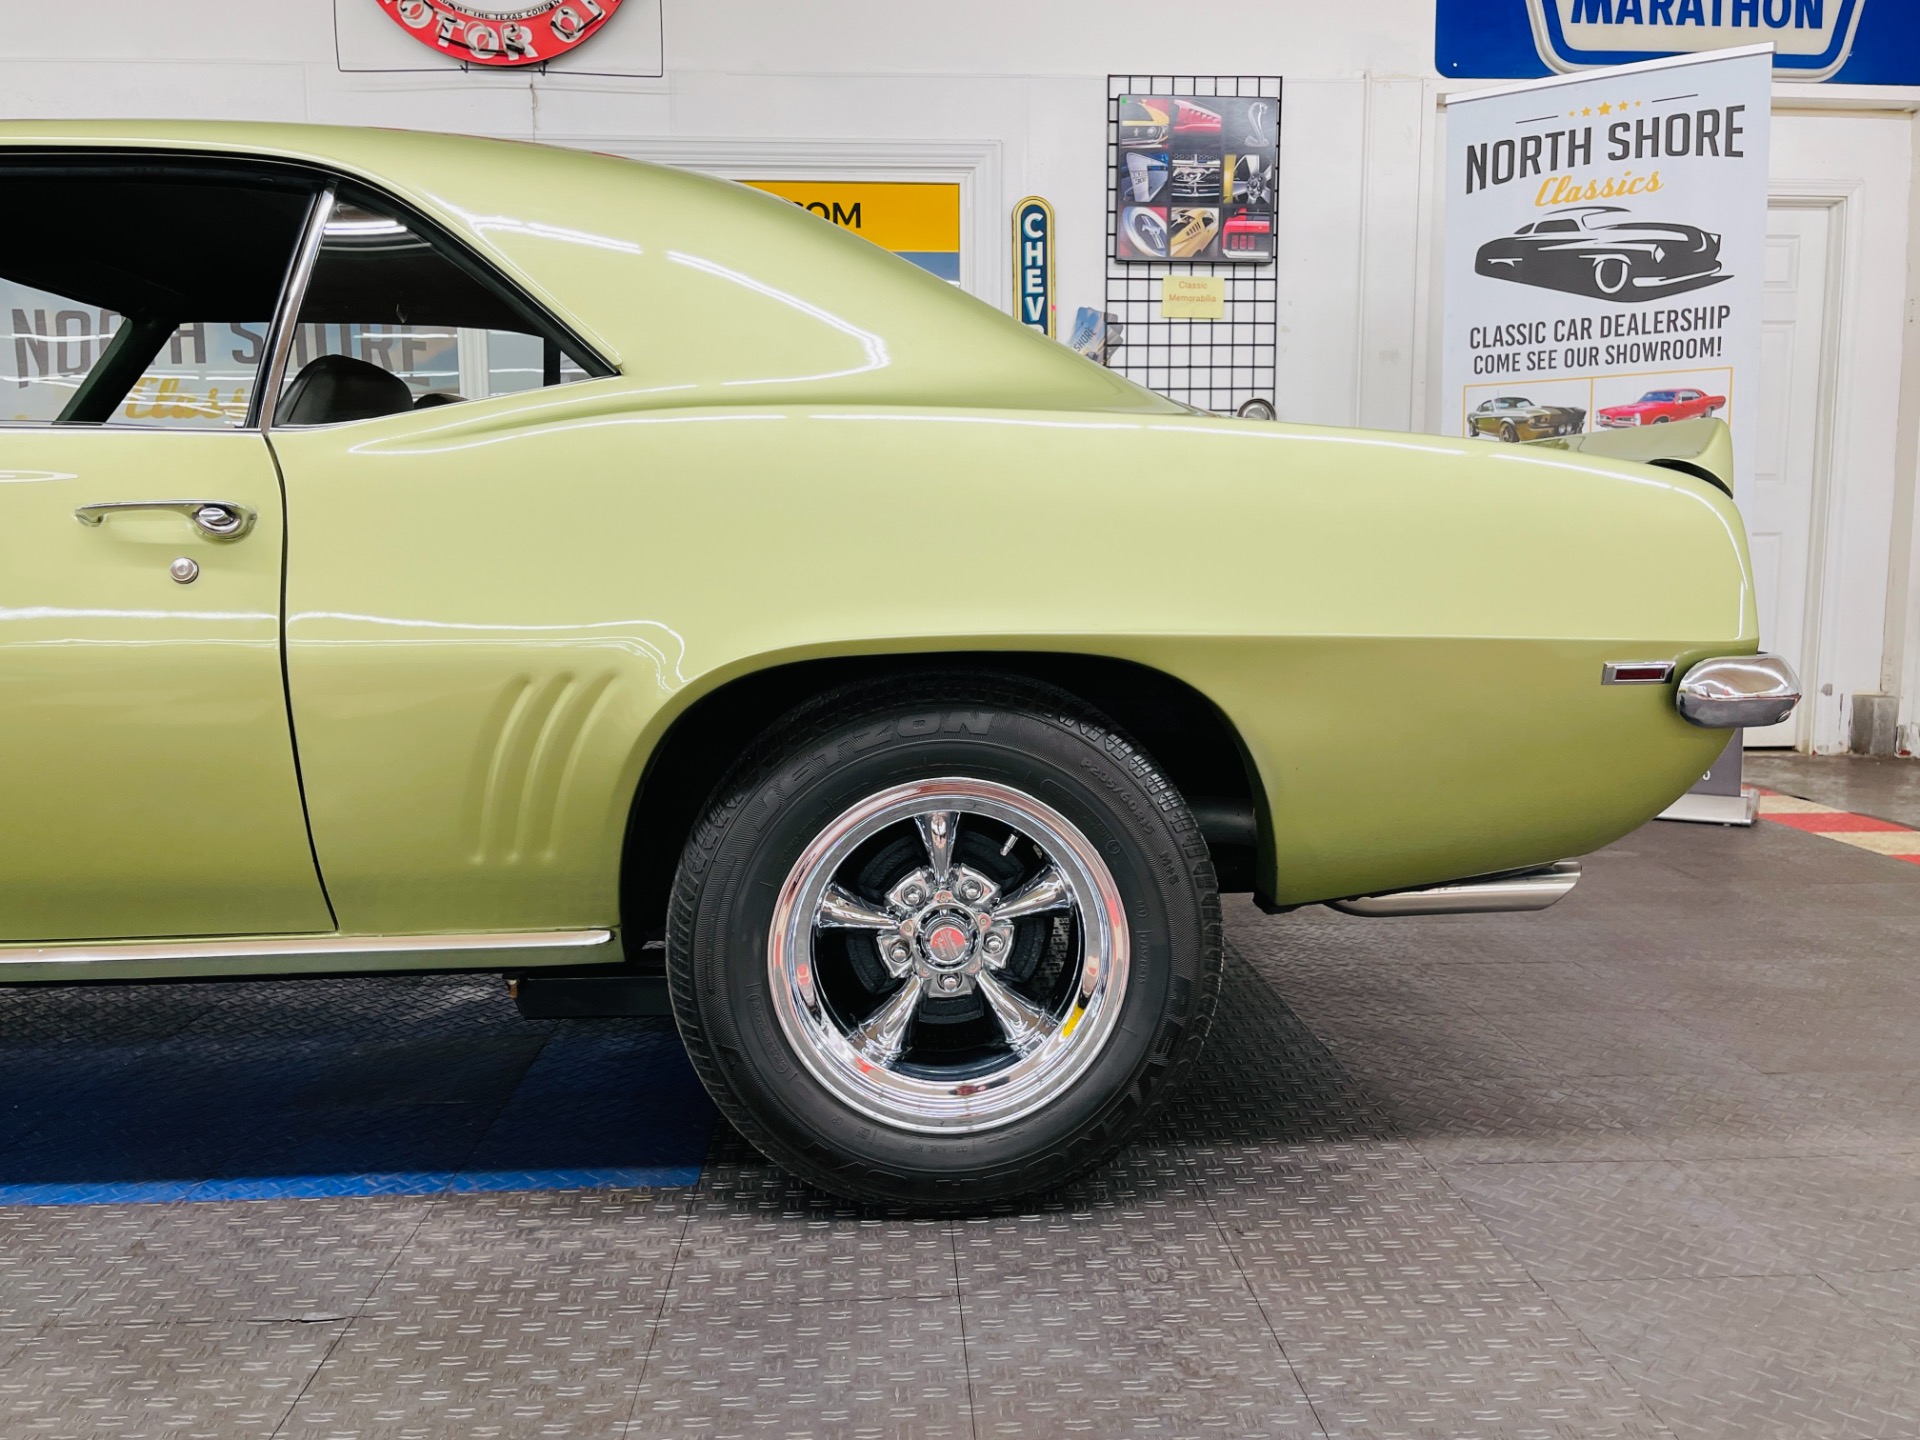 Used 1969 Chevrolet Camaro - FROST GREEN - 383 ENGINE - VERY CLEAN - SEE VIDEO | Mundelein, IL